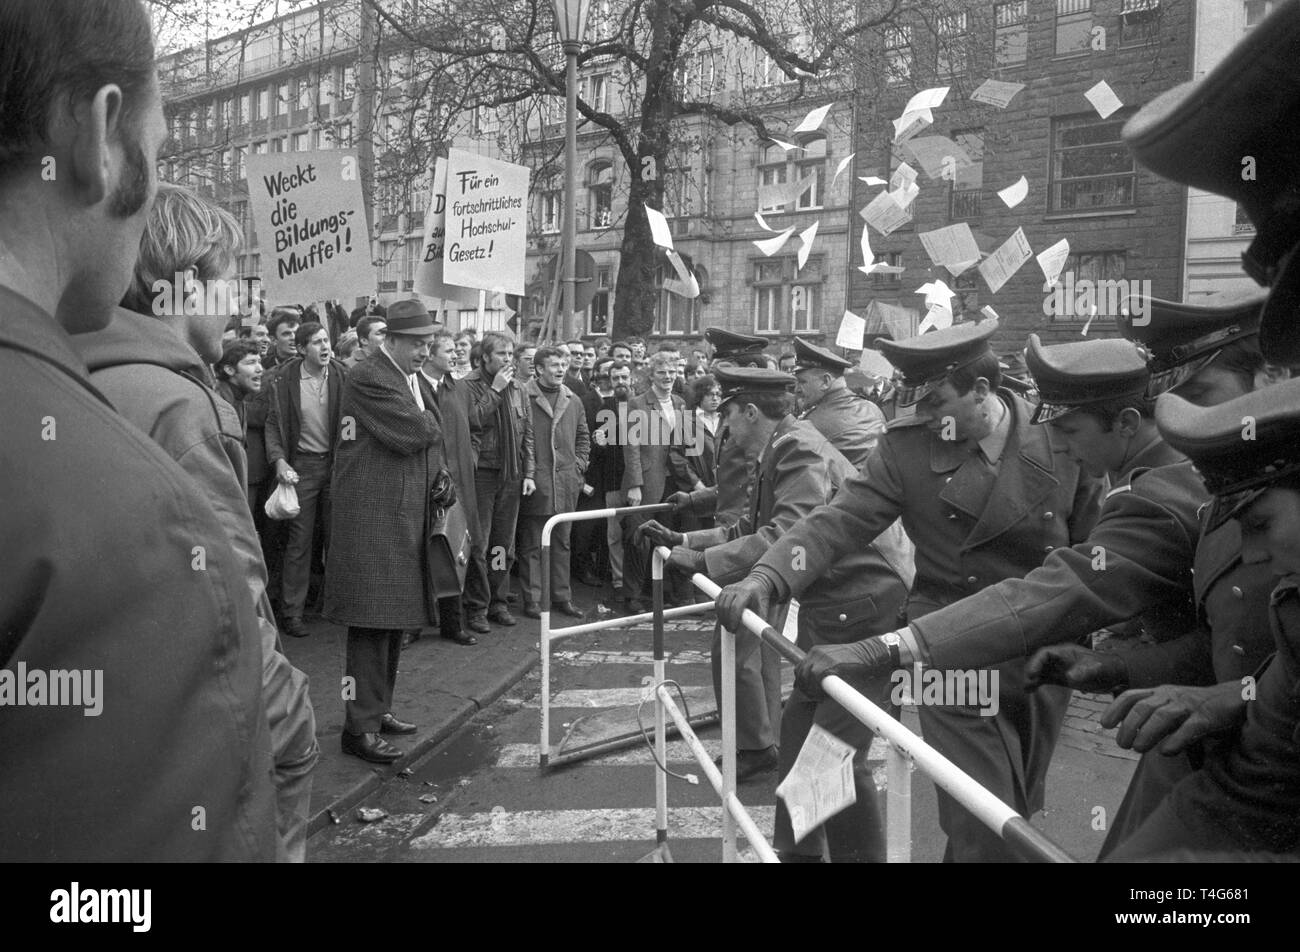 About 700 students demonstrate against a draft of the Higher Education Act in Duesseldorf on 23 April 1969. | usage worldwide Stock Photo